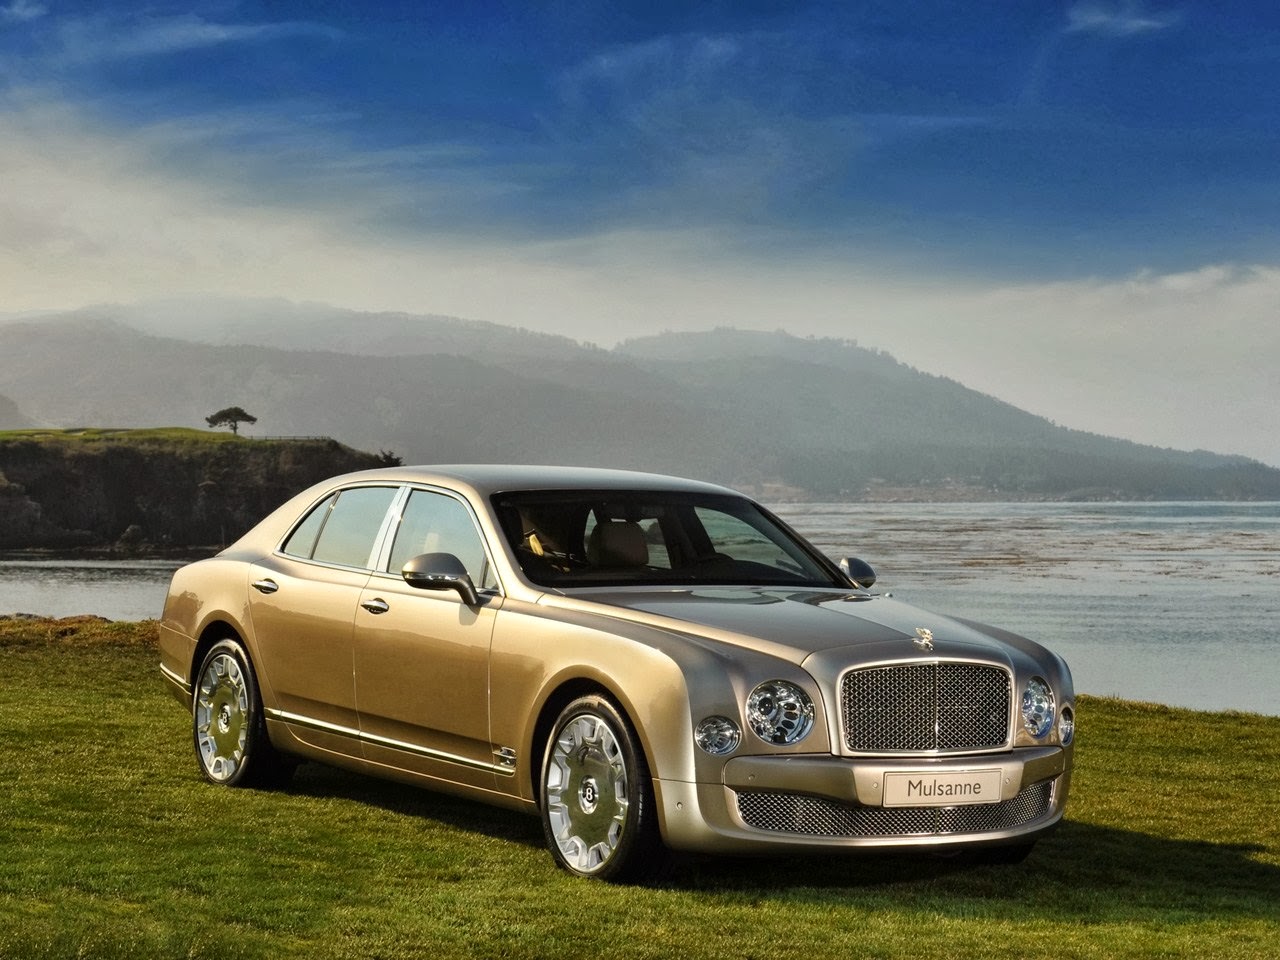 This luxury Bentley Mulsanne expensive car prices $296,000 approx.